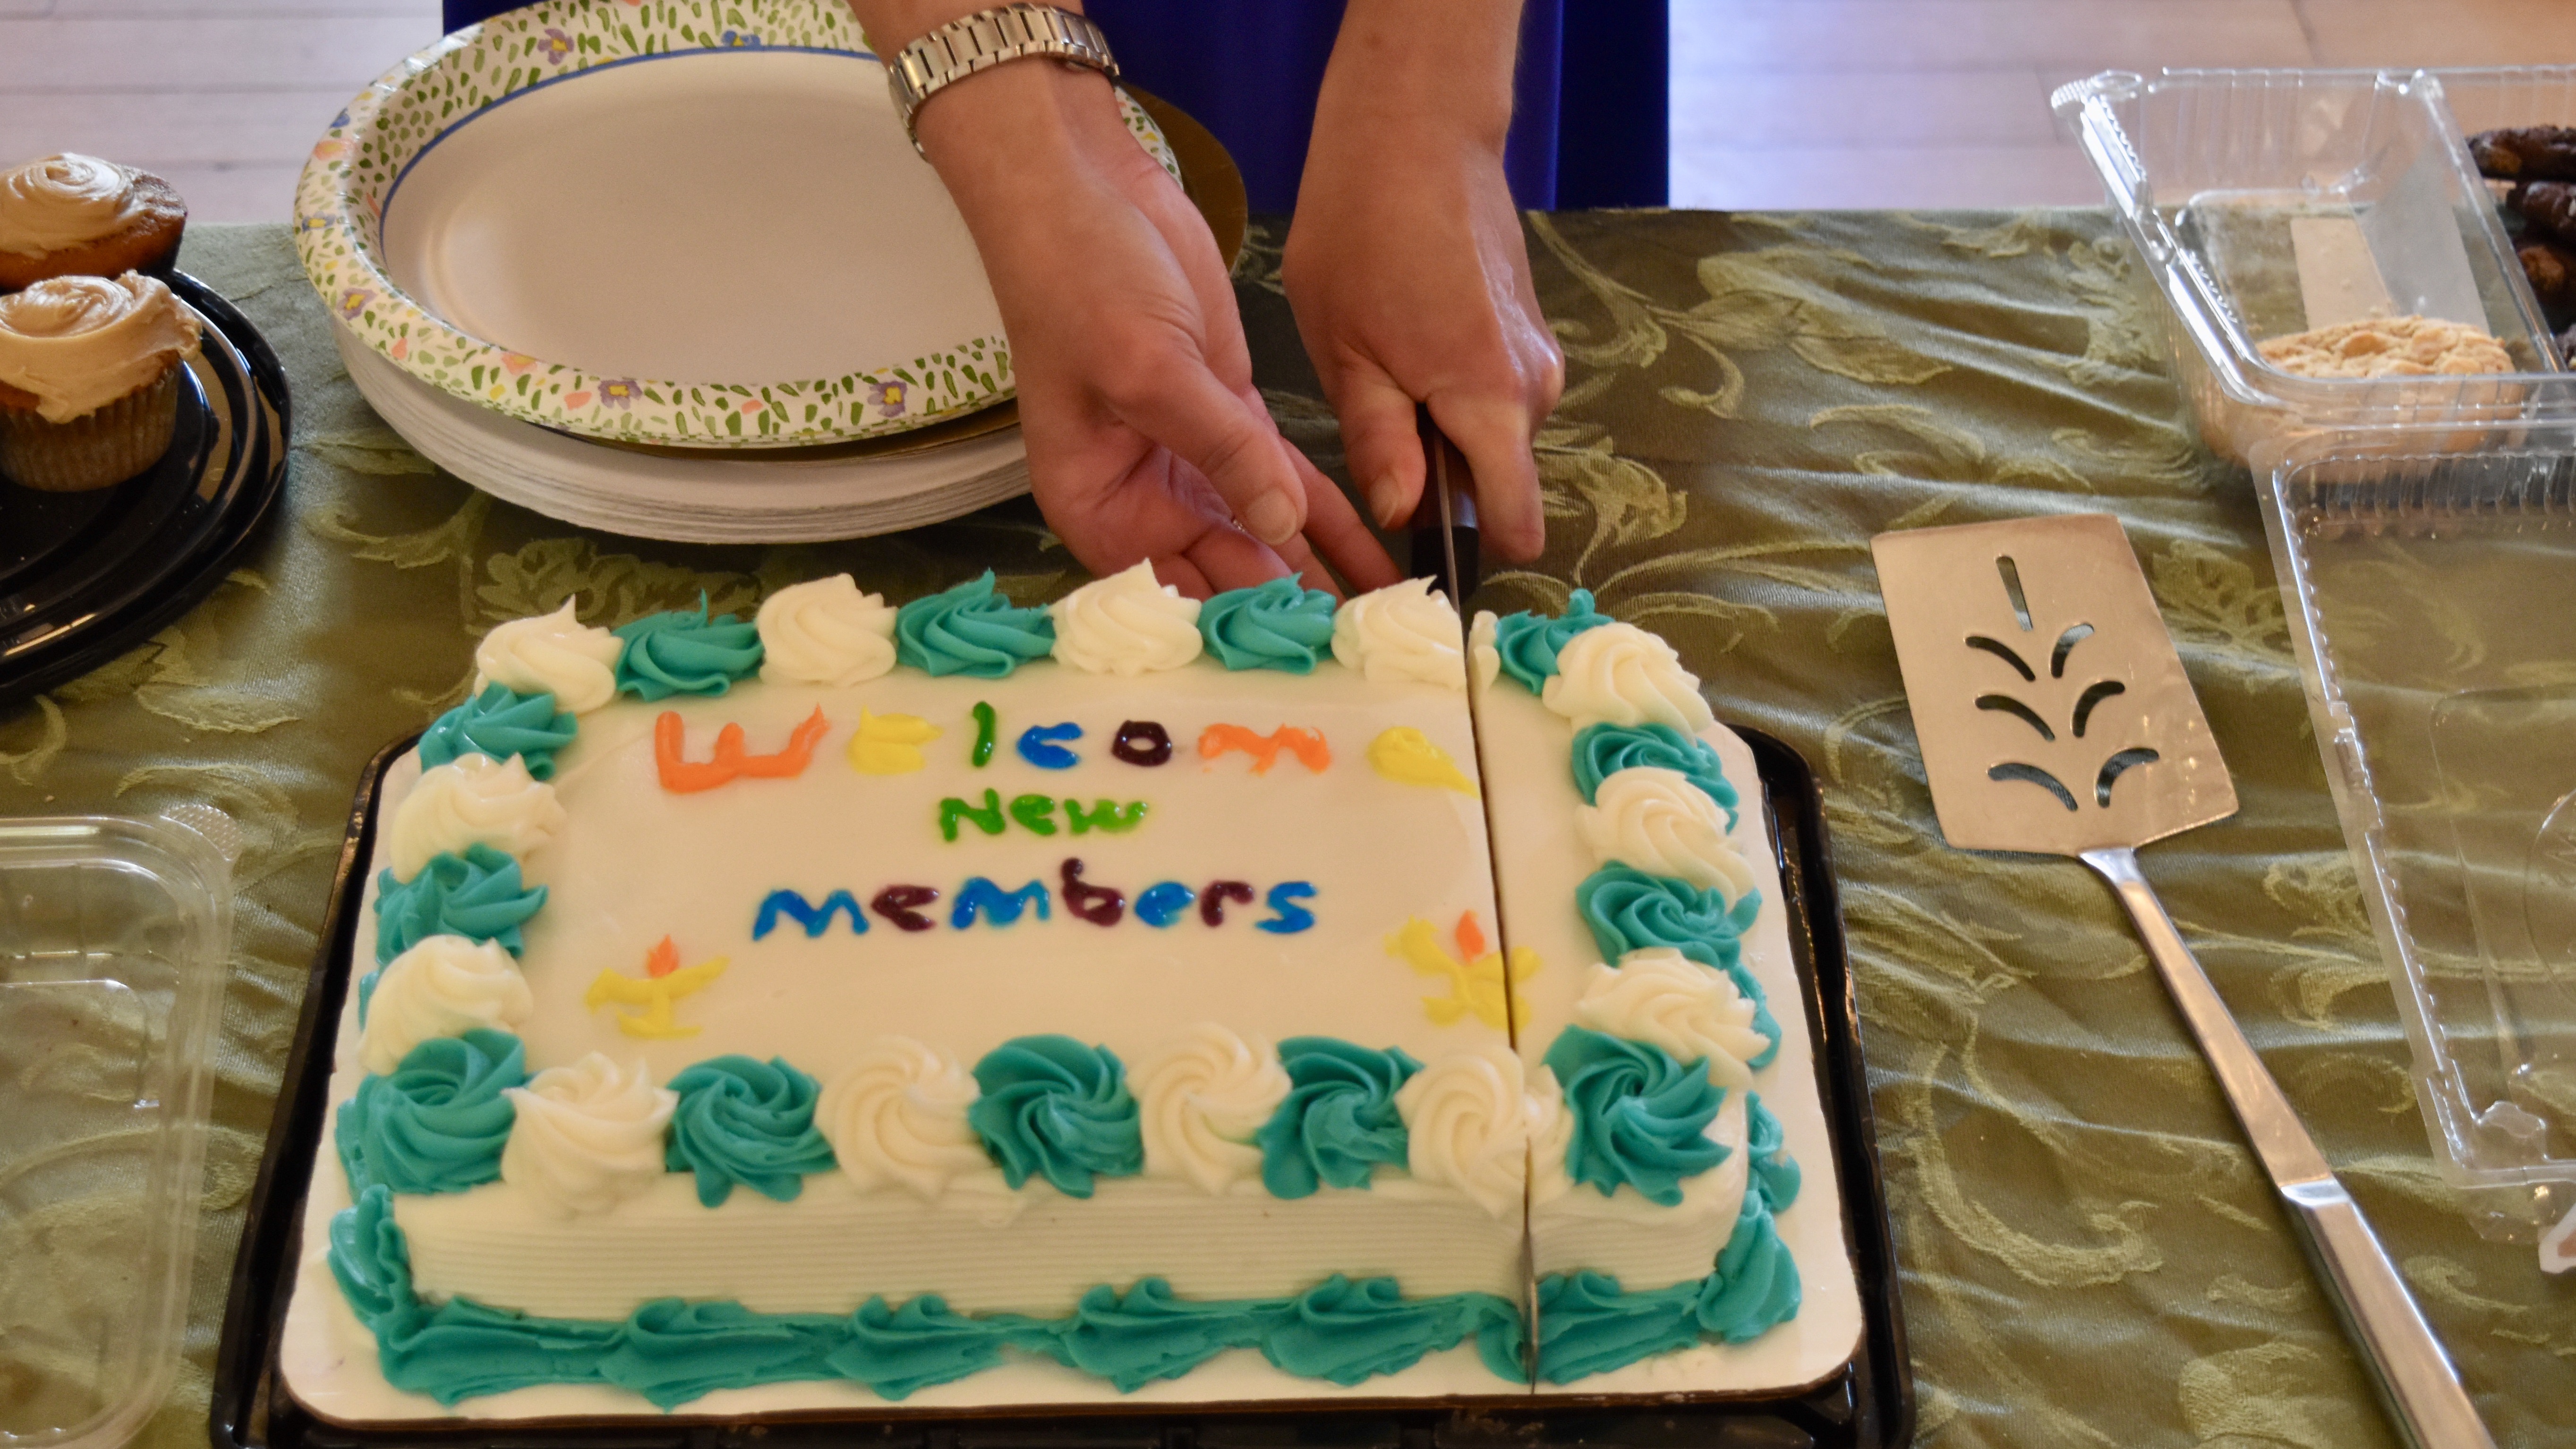 A cake inscribed "Welcome New Members"